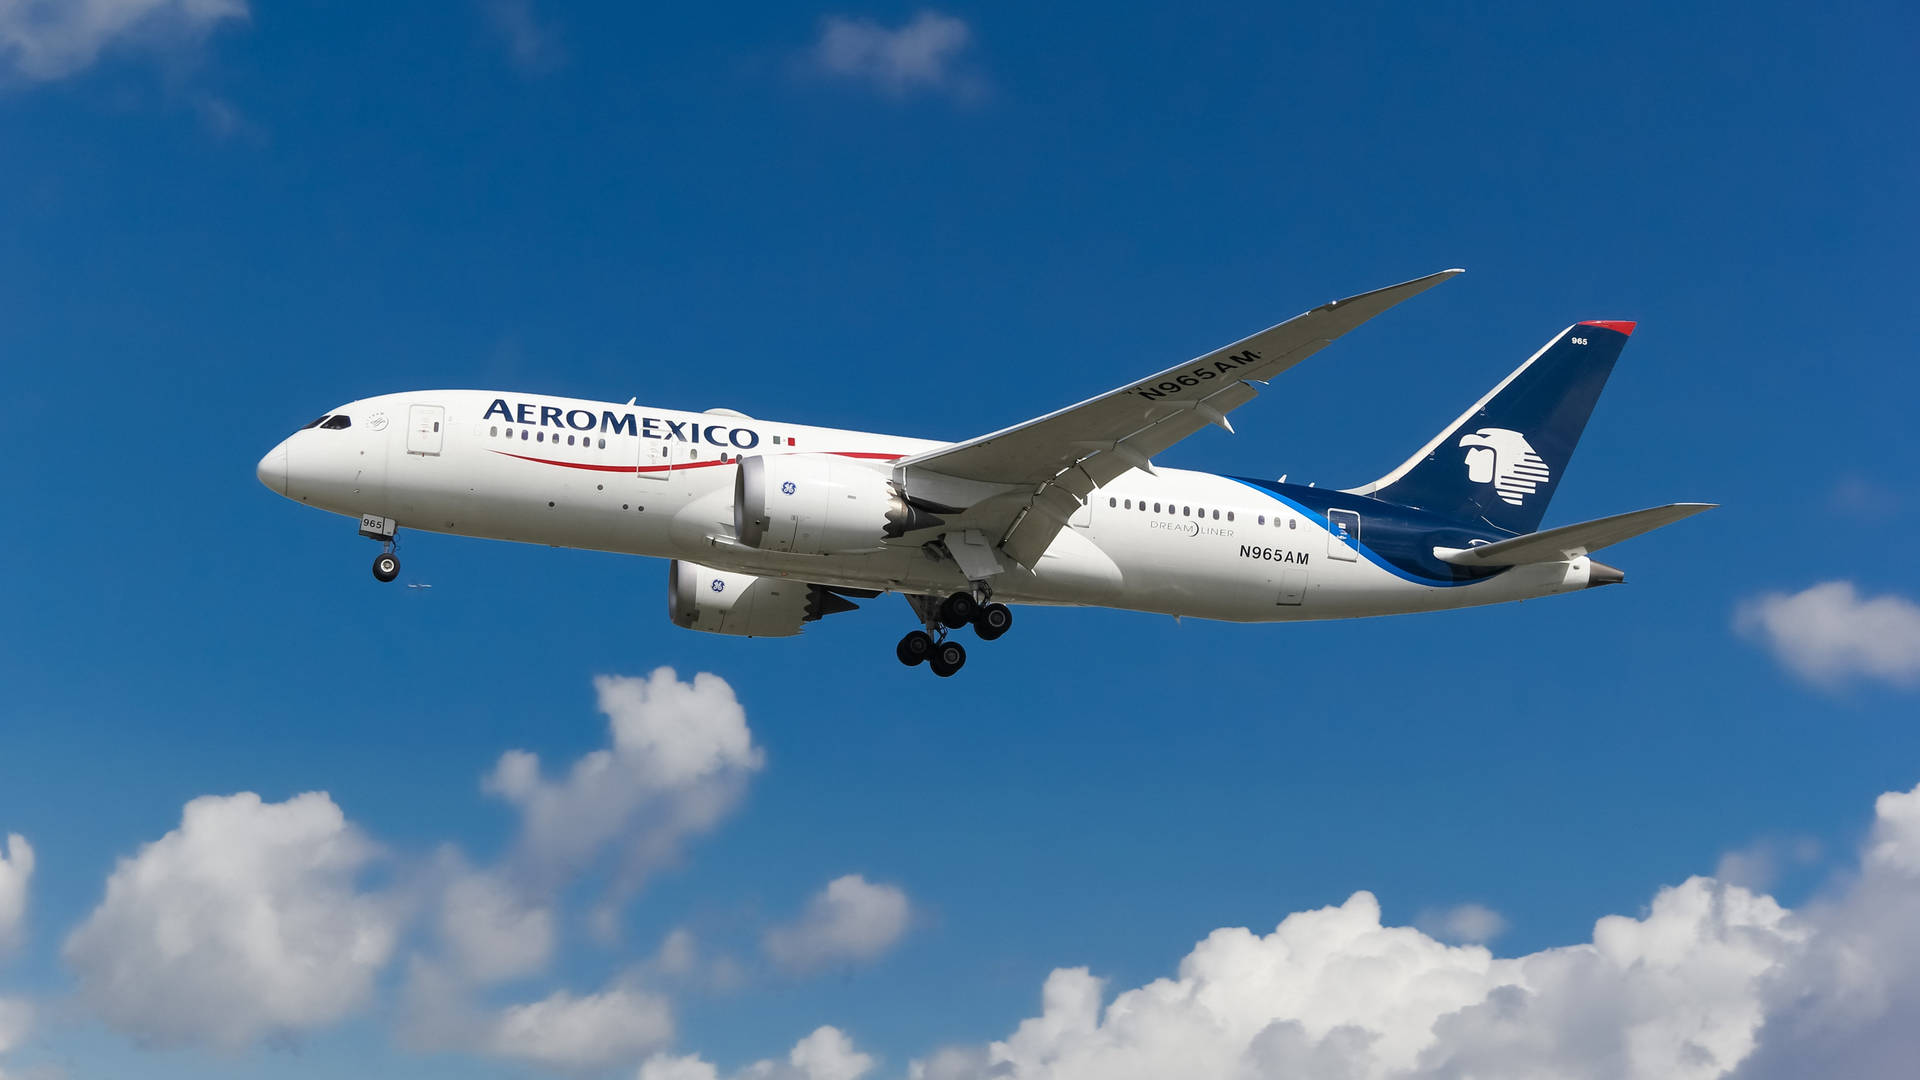 Flying Aeromexico Airline Plane Low Angle Shot Wallpaper